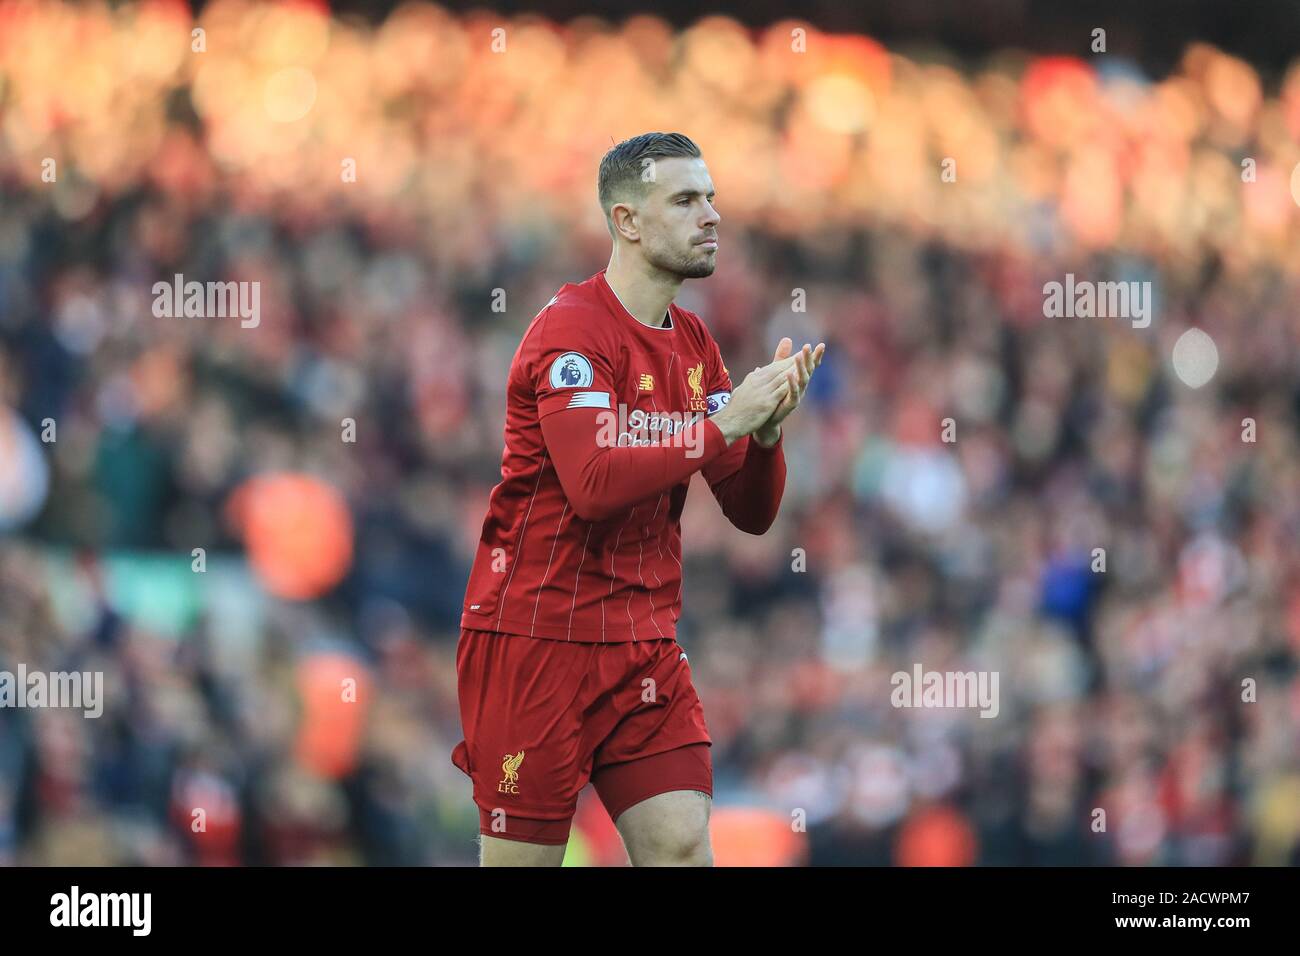 30th November 2019, Anfield, Liverpool, England; Premier League, Liverpool v Brighton and Hove Albion : Jordan Henderson (14) of Liverpool during the game Credit: Mark Cosgrove/News Images Stock Photo